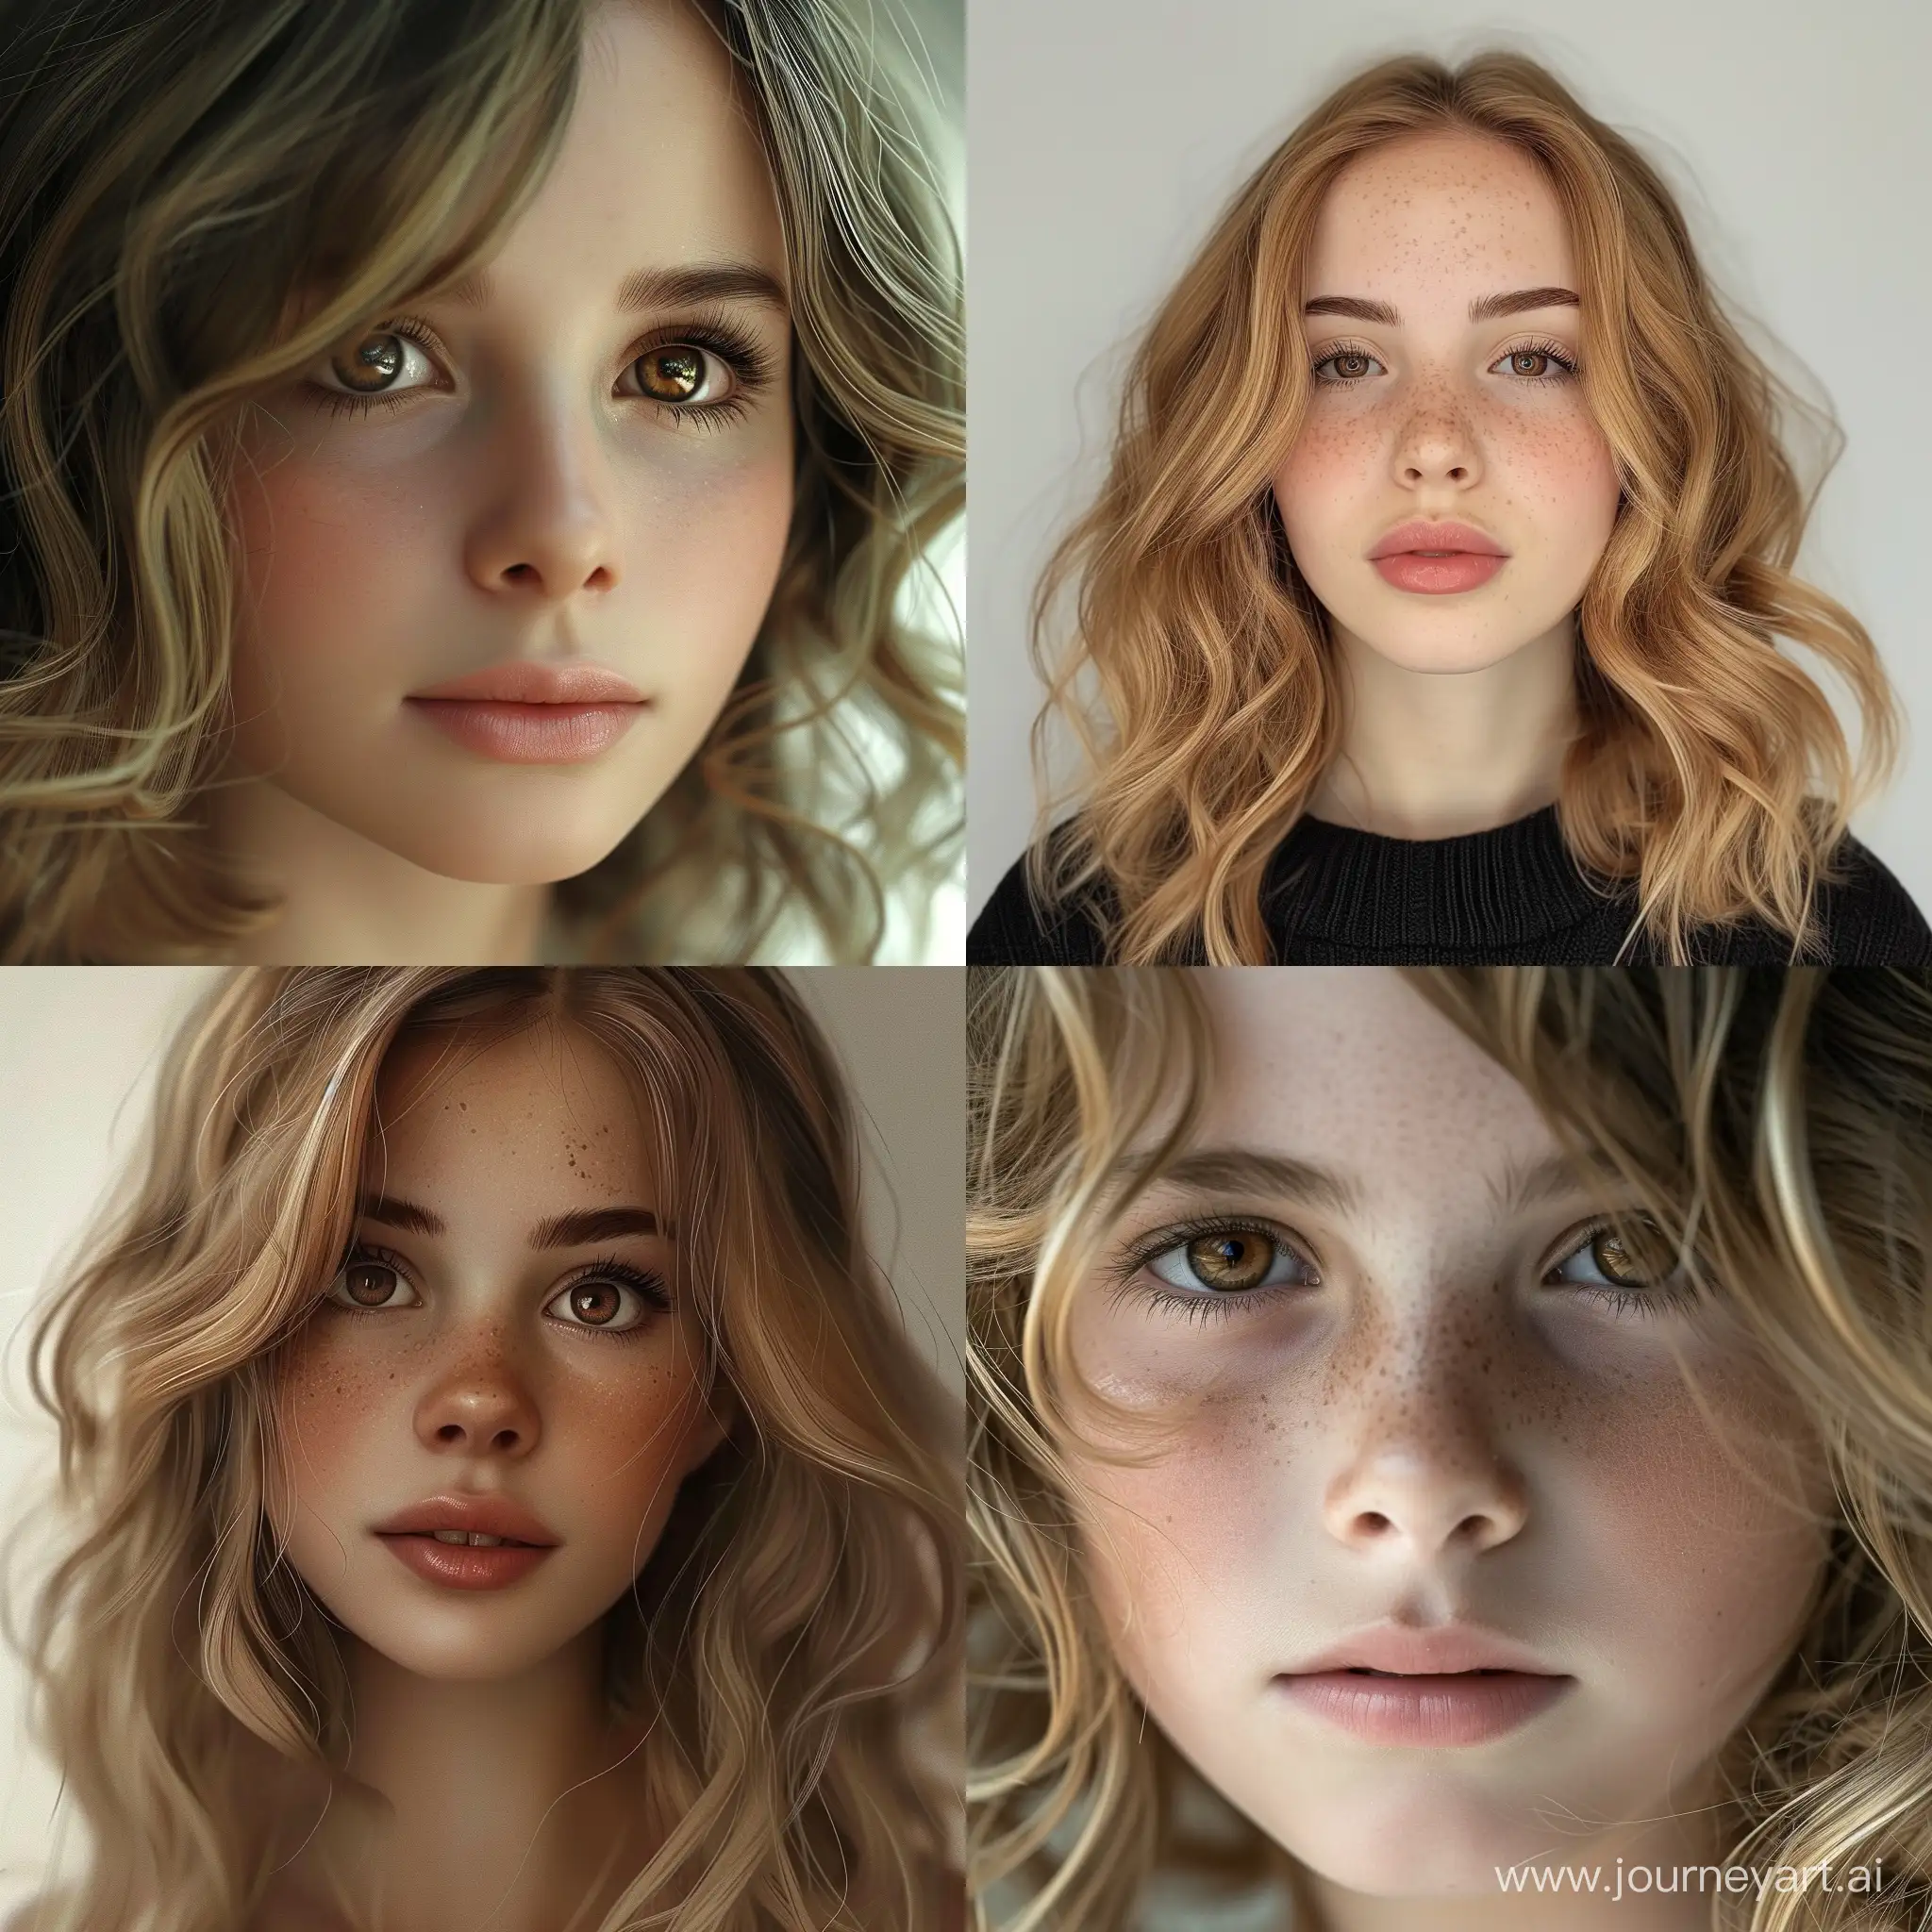 Portrait-of-Anna-Girl-with-Light-Wavy-Hair-and-Brown-Eyes